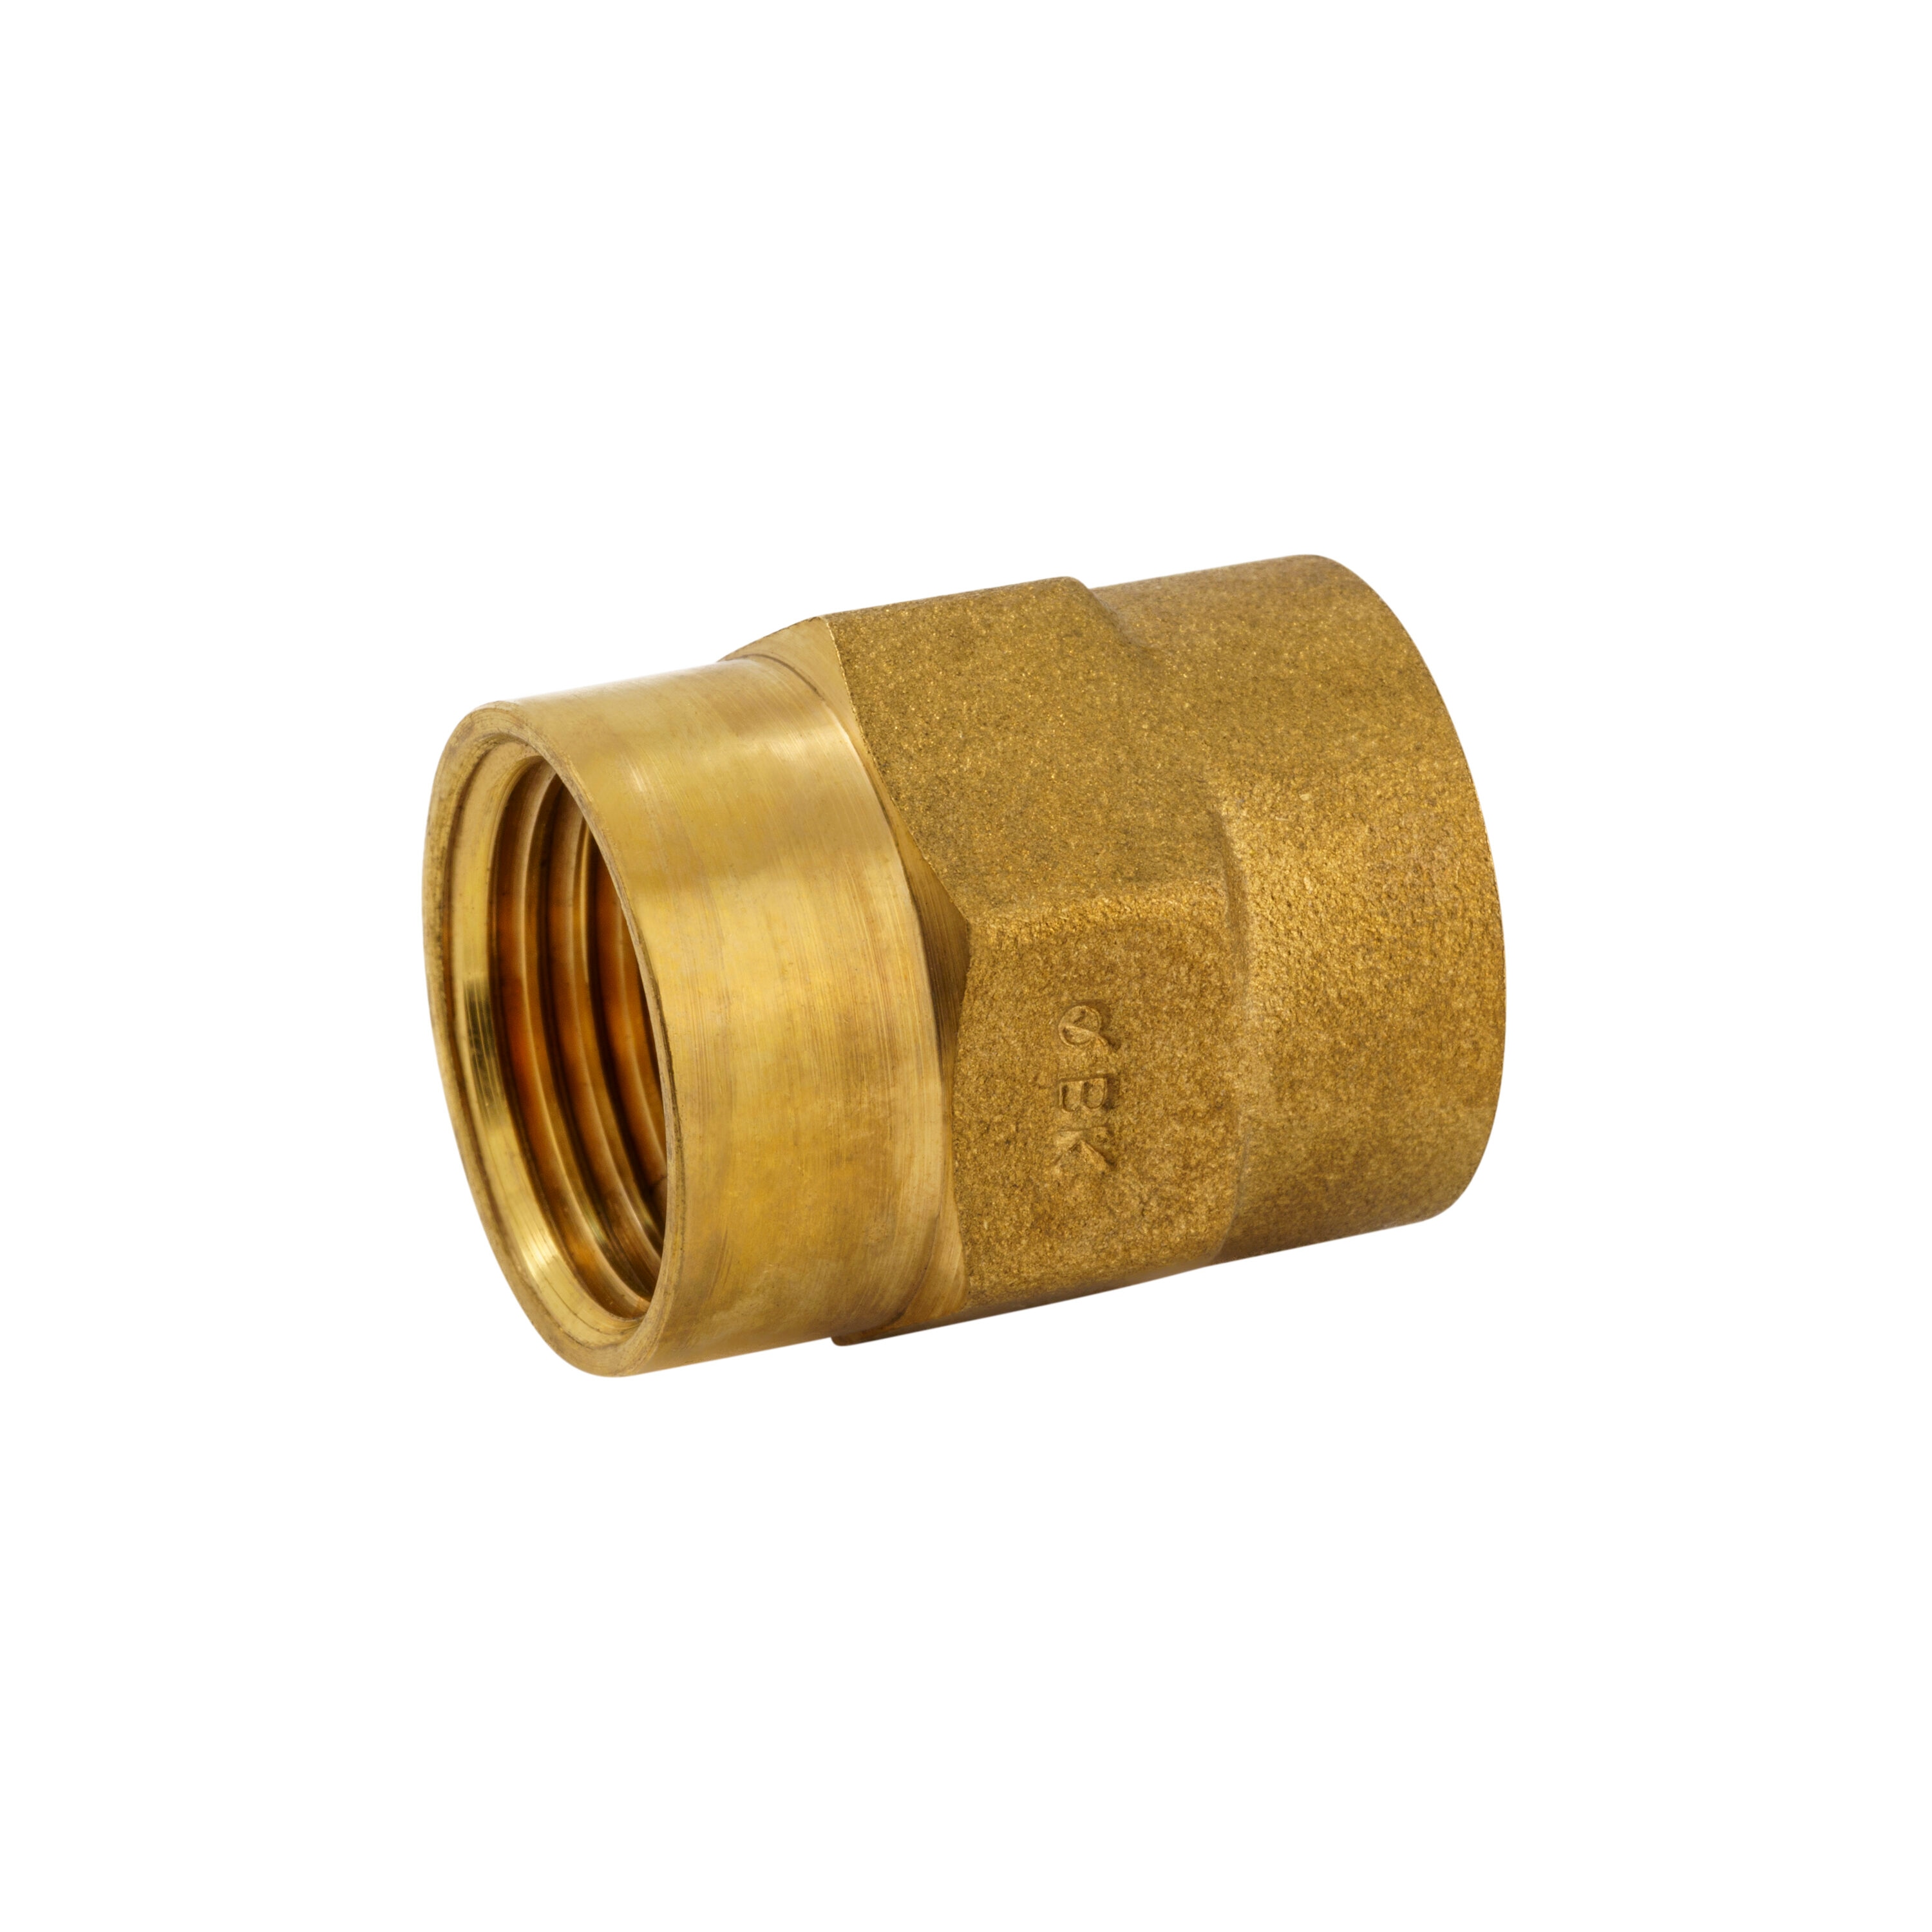 Coupling Brass Fittings at